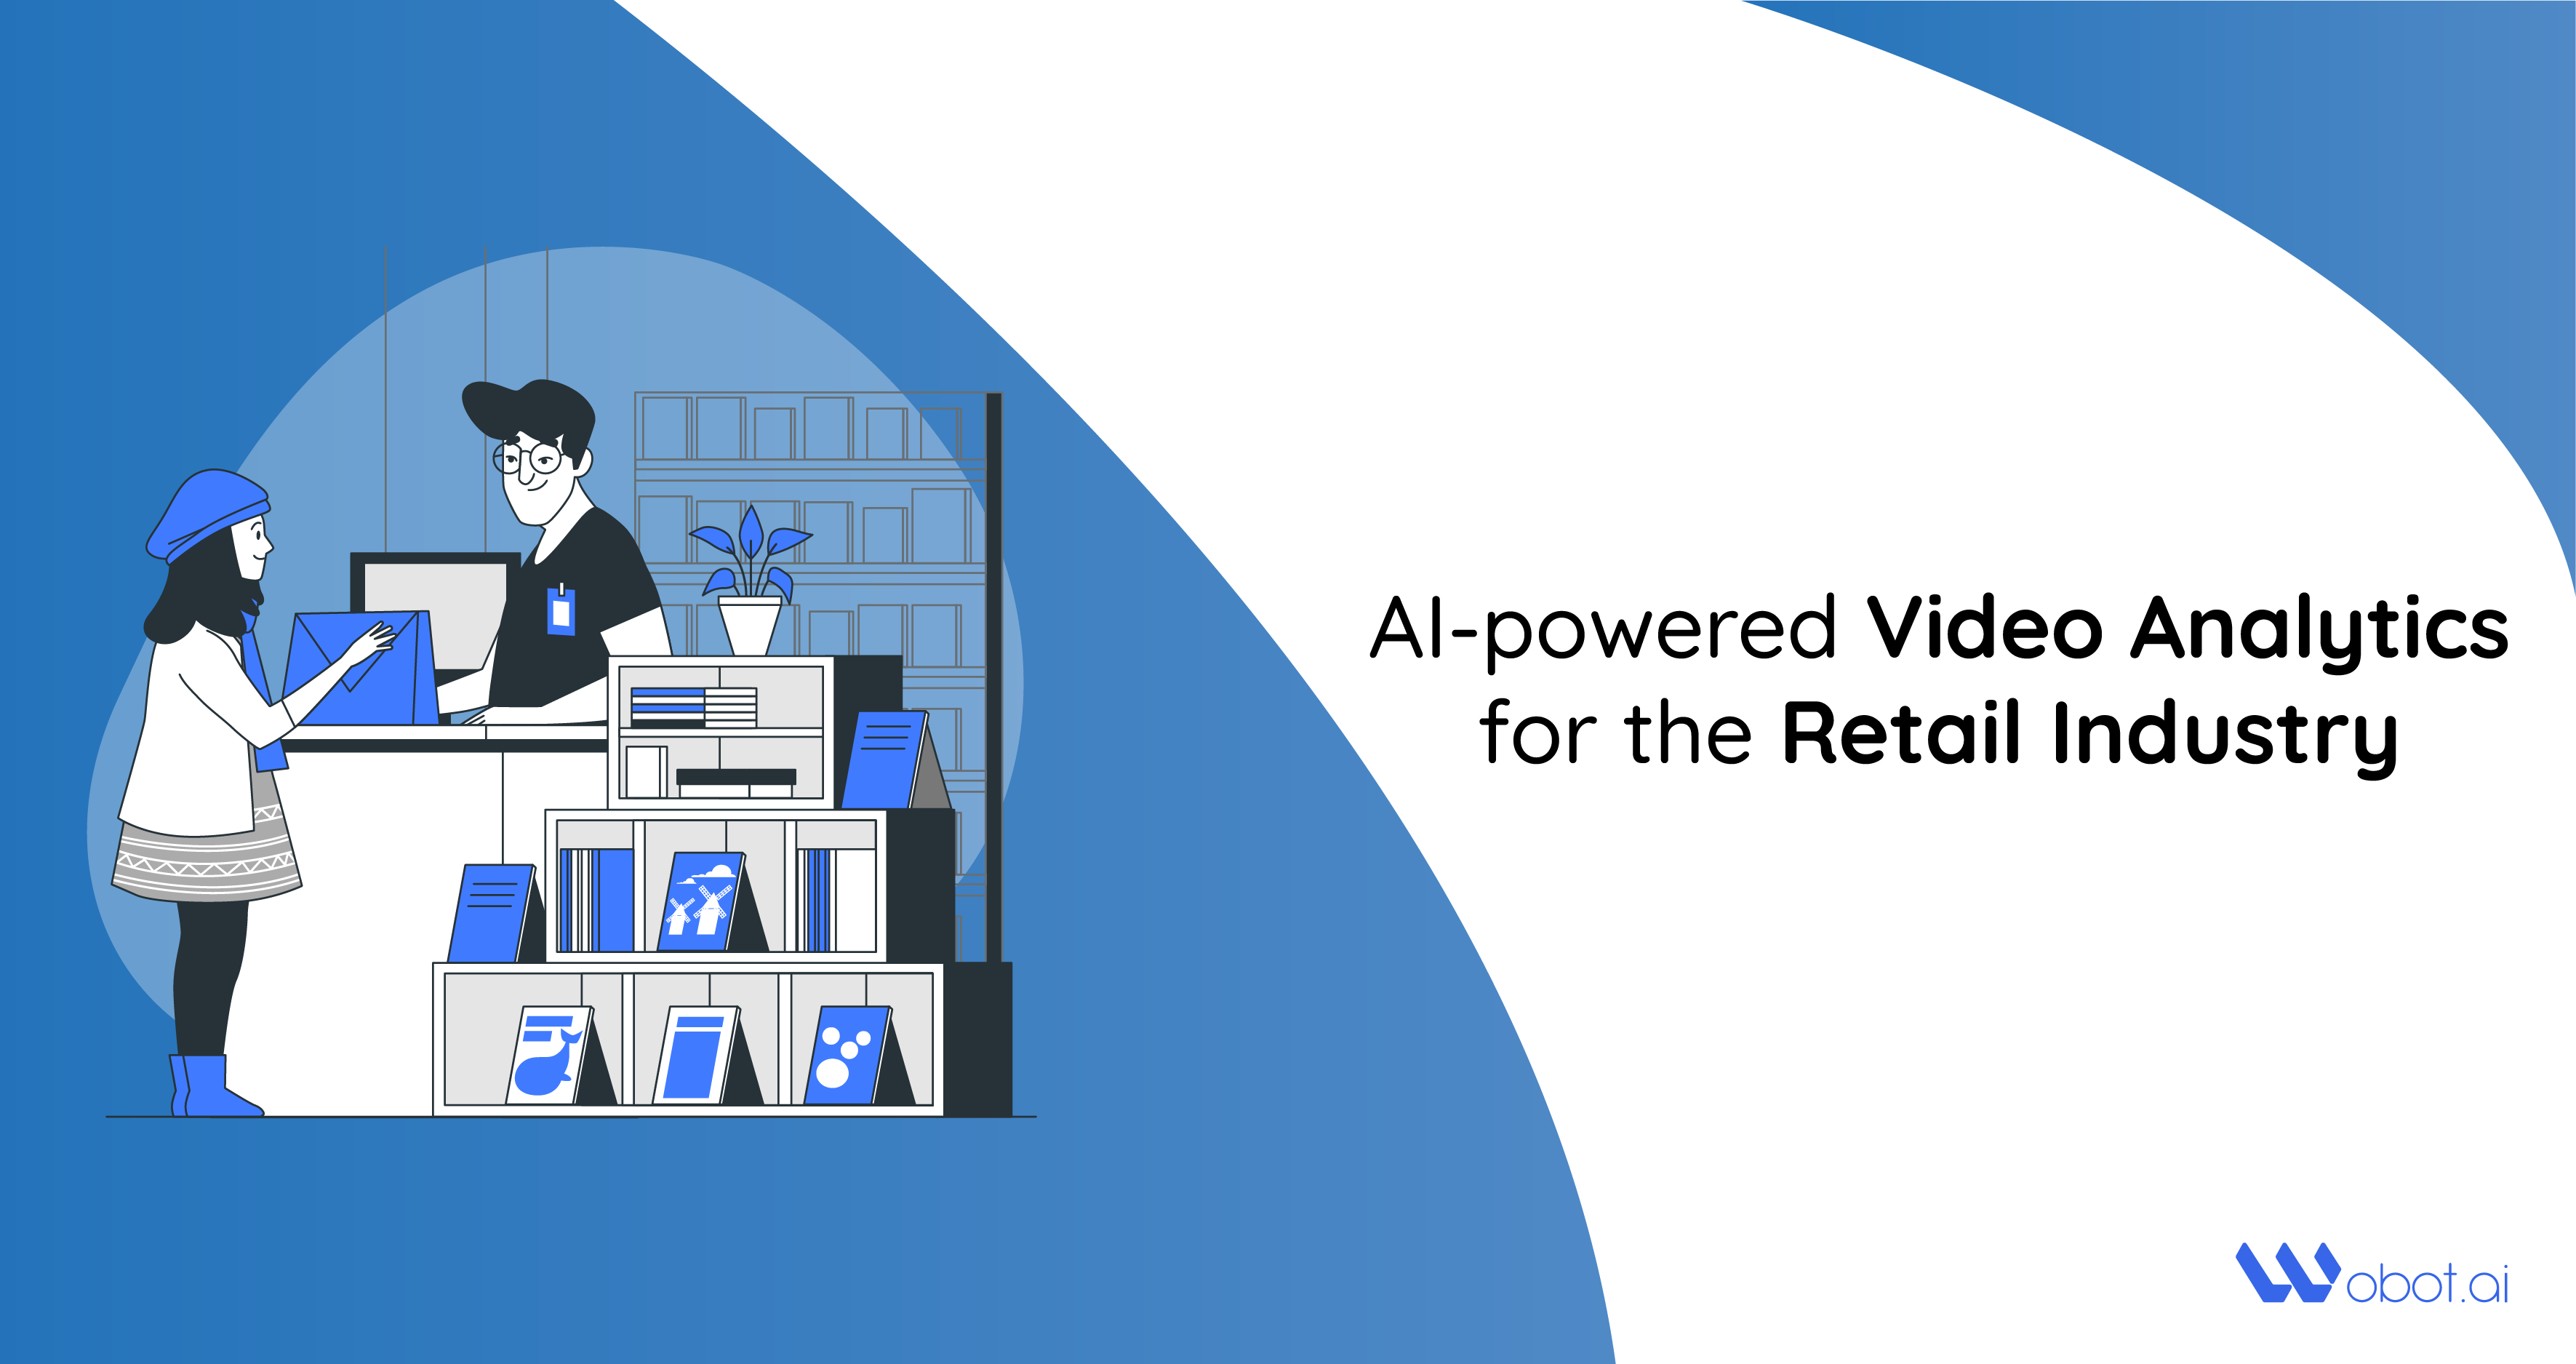 AI-powered Video Analytics for the Retail Industry